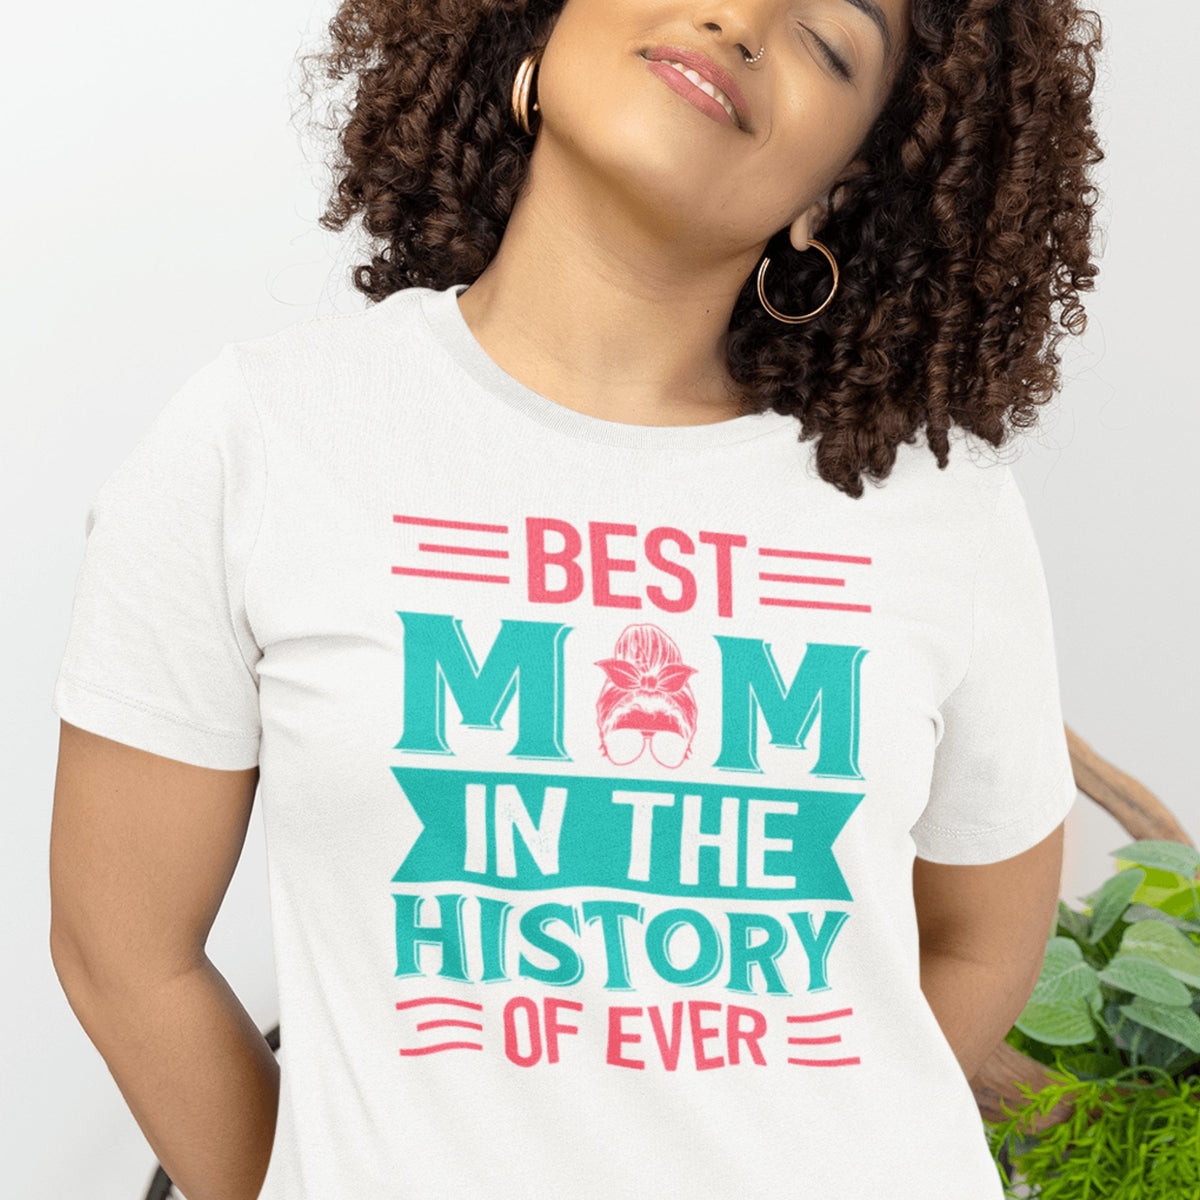 Best Mom In The History Of Ever T-Shirt, Mothers day gift - Eventwisecreations